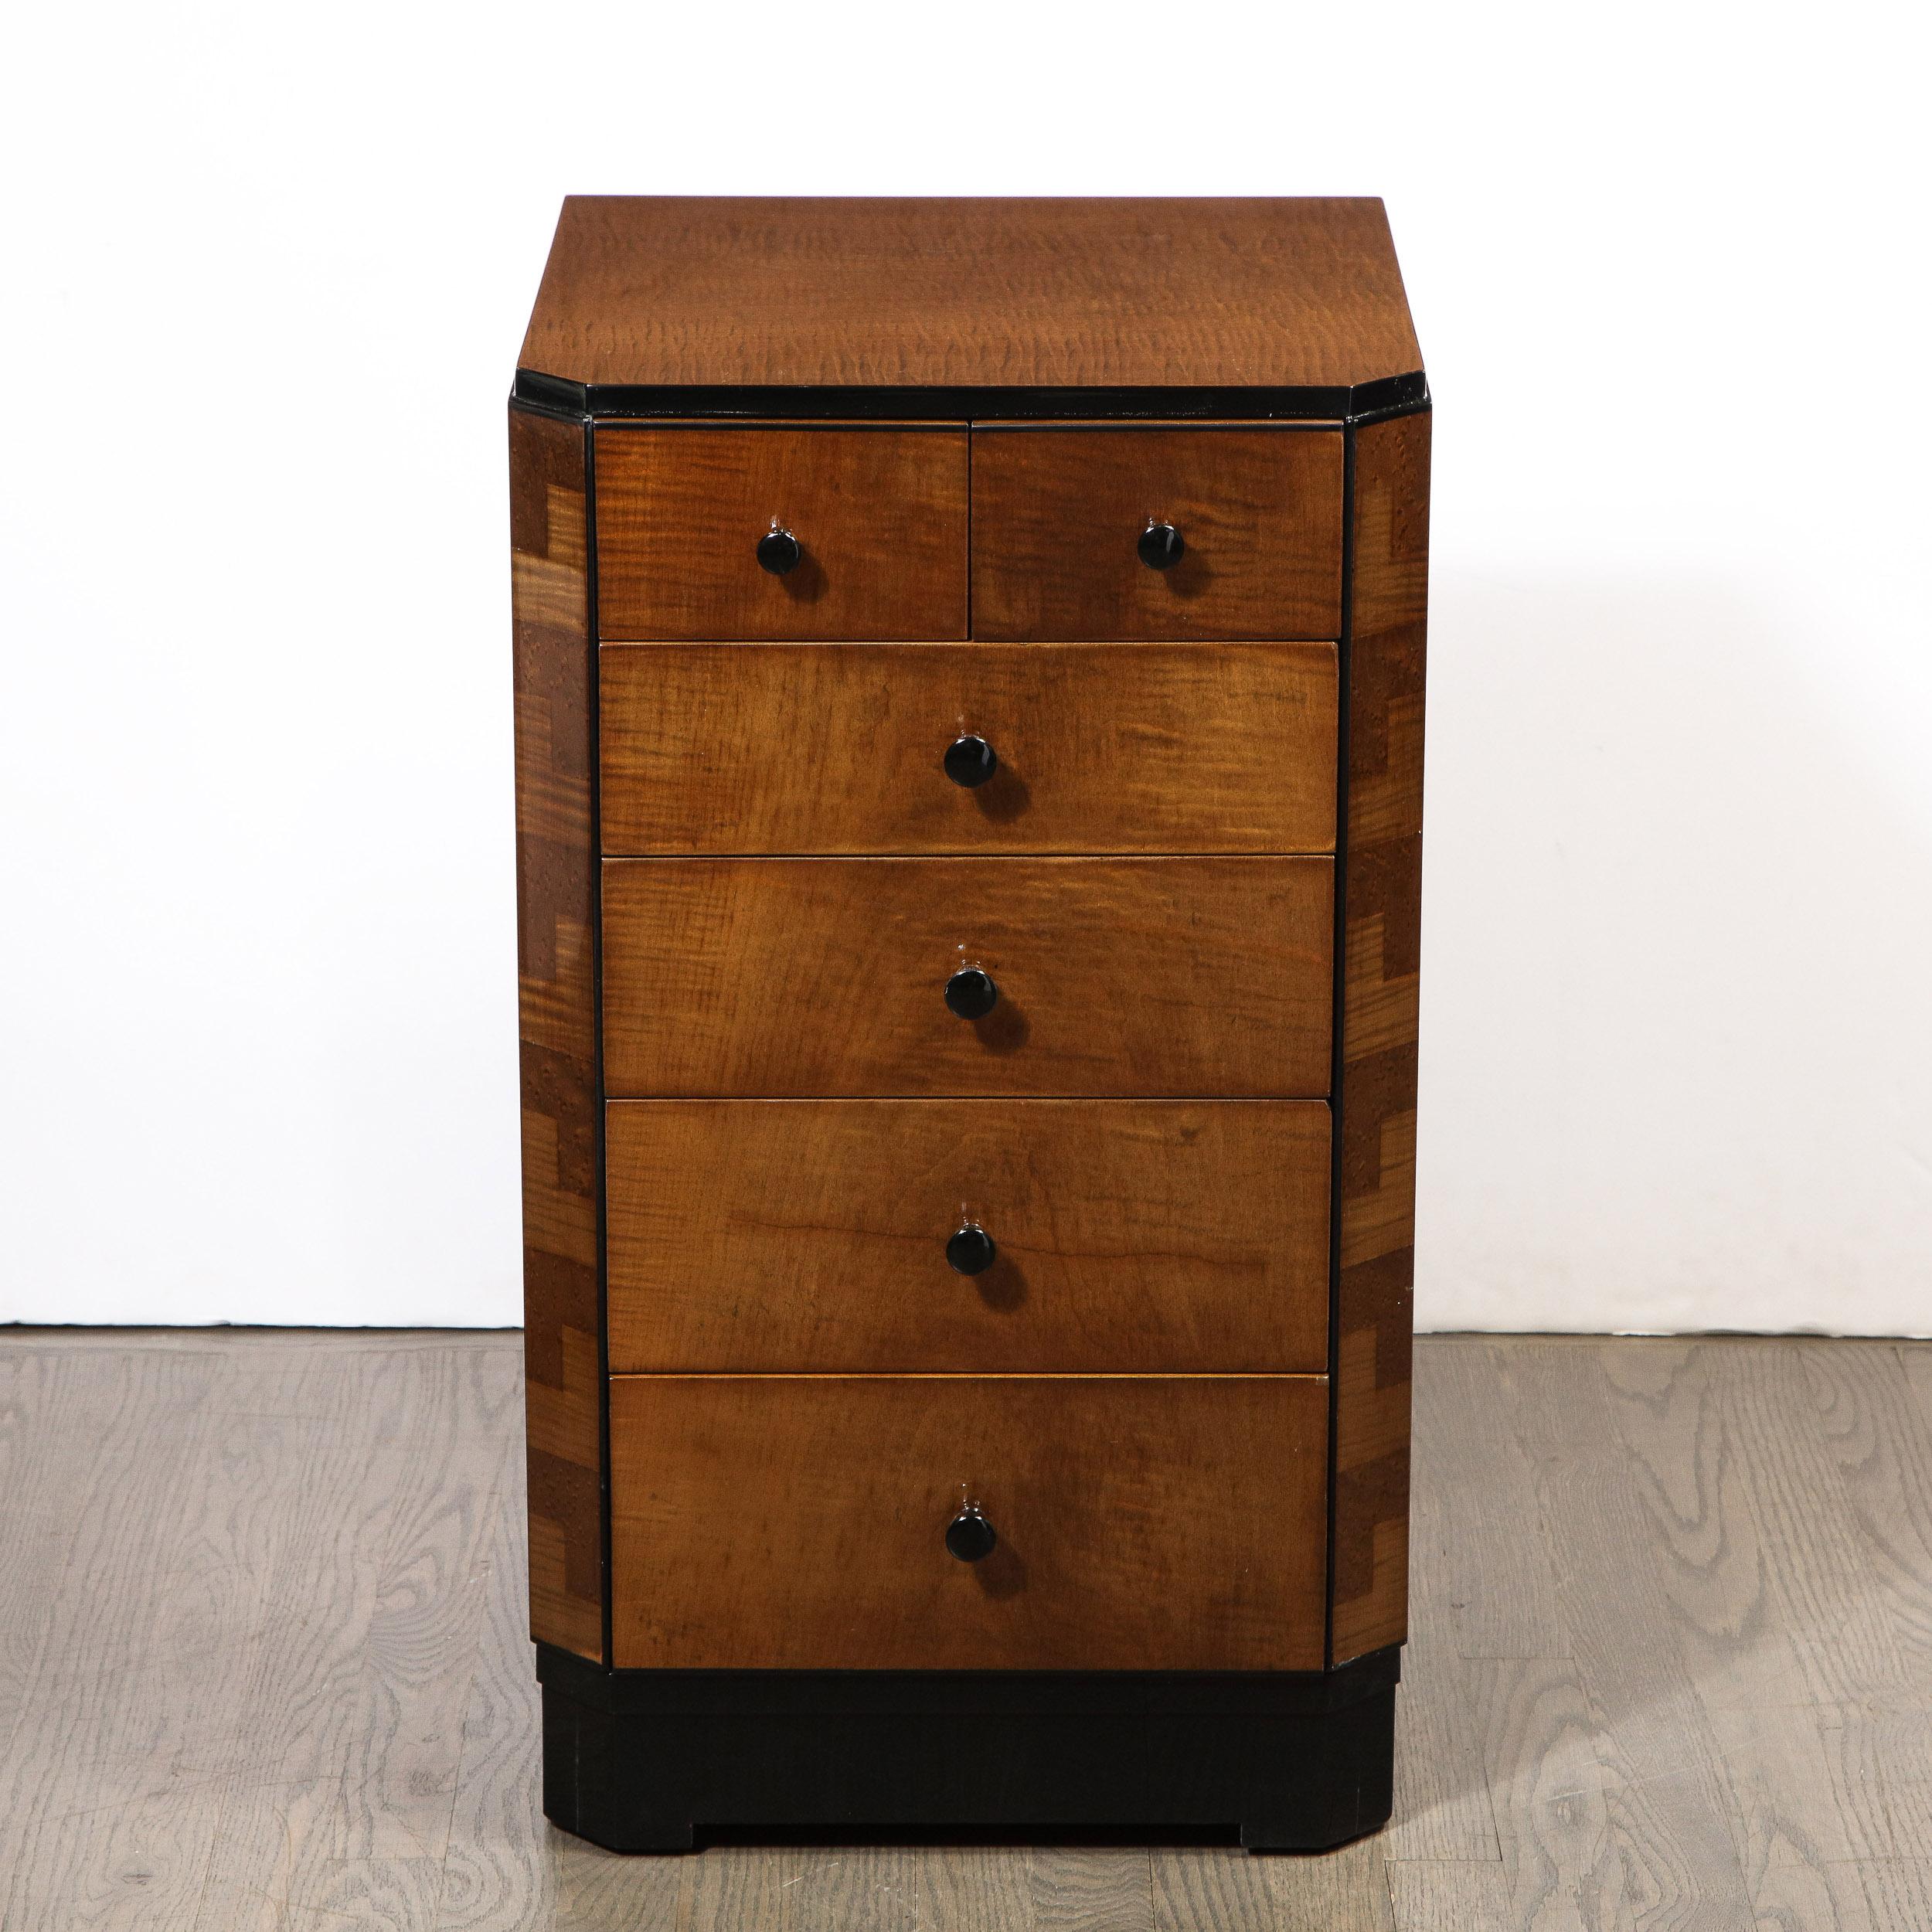 This elegant pair of Art Deco cubist skyscraper style nightstands were custom designed for Mr. Roger Sperry (American neuropsychologist, neurobiologist and Nobel laureate) and his wife in the United States in 1930 by the esteemed Henry Gercken. They